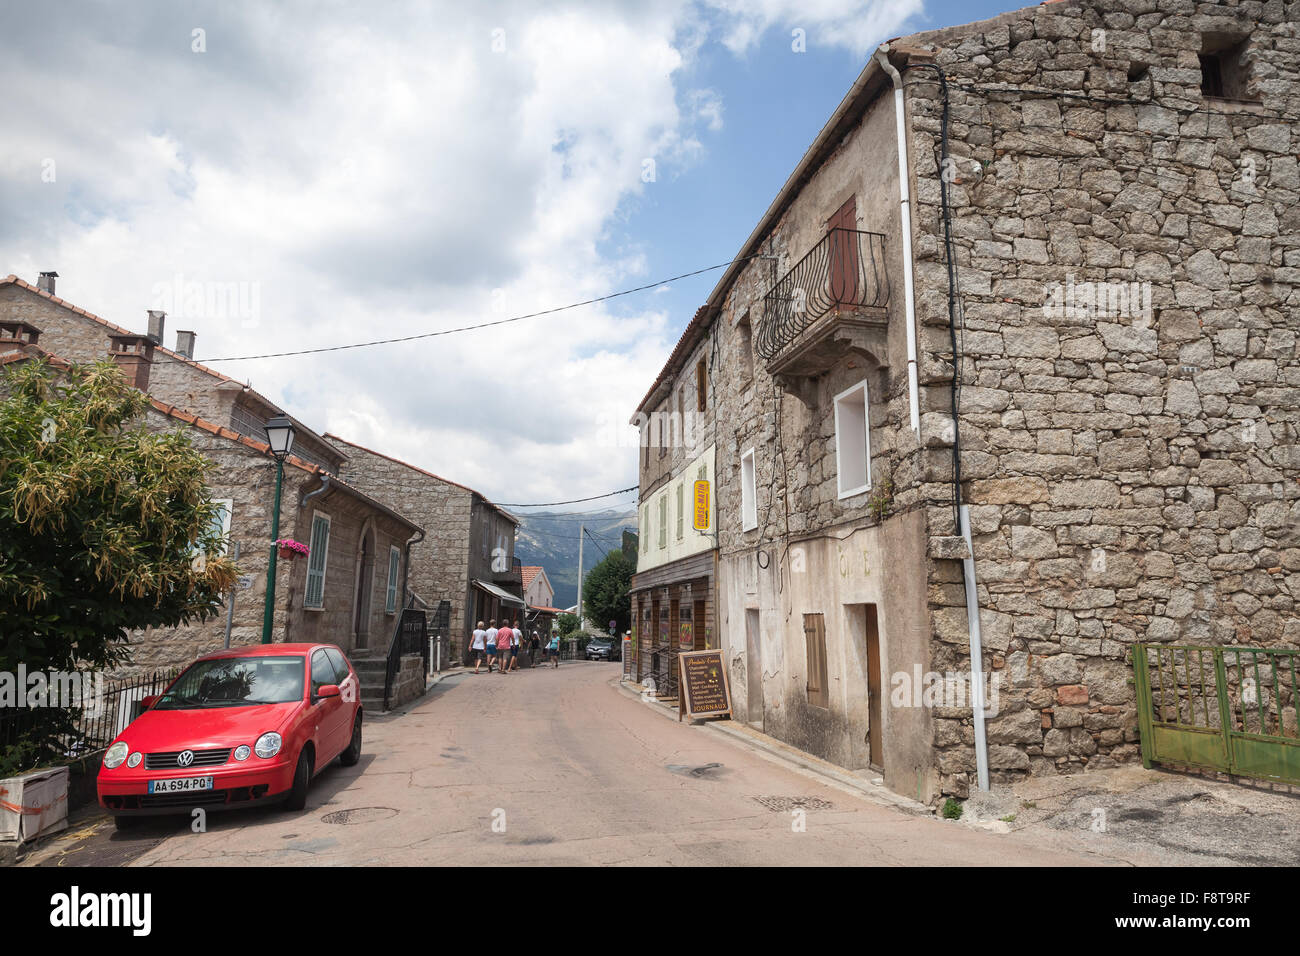 Zonza, France - July 1, 2015: Corsican village street view, old stone houses along the road. Zonza, South Corsica, France Stock Photo